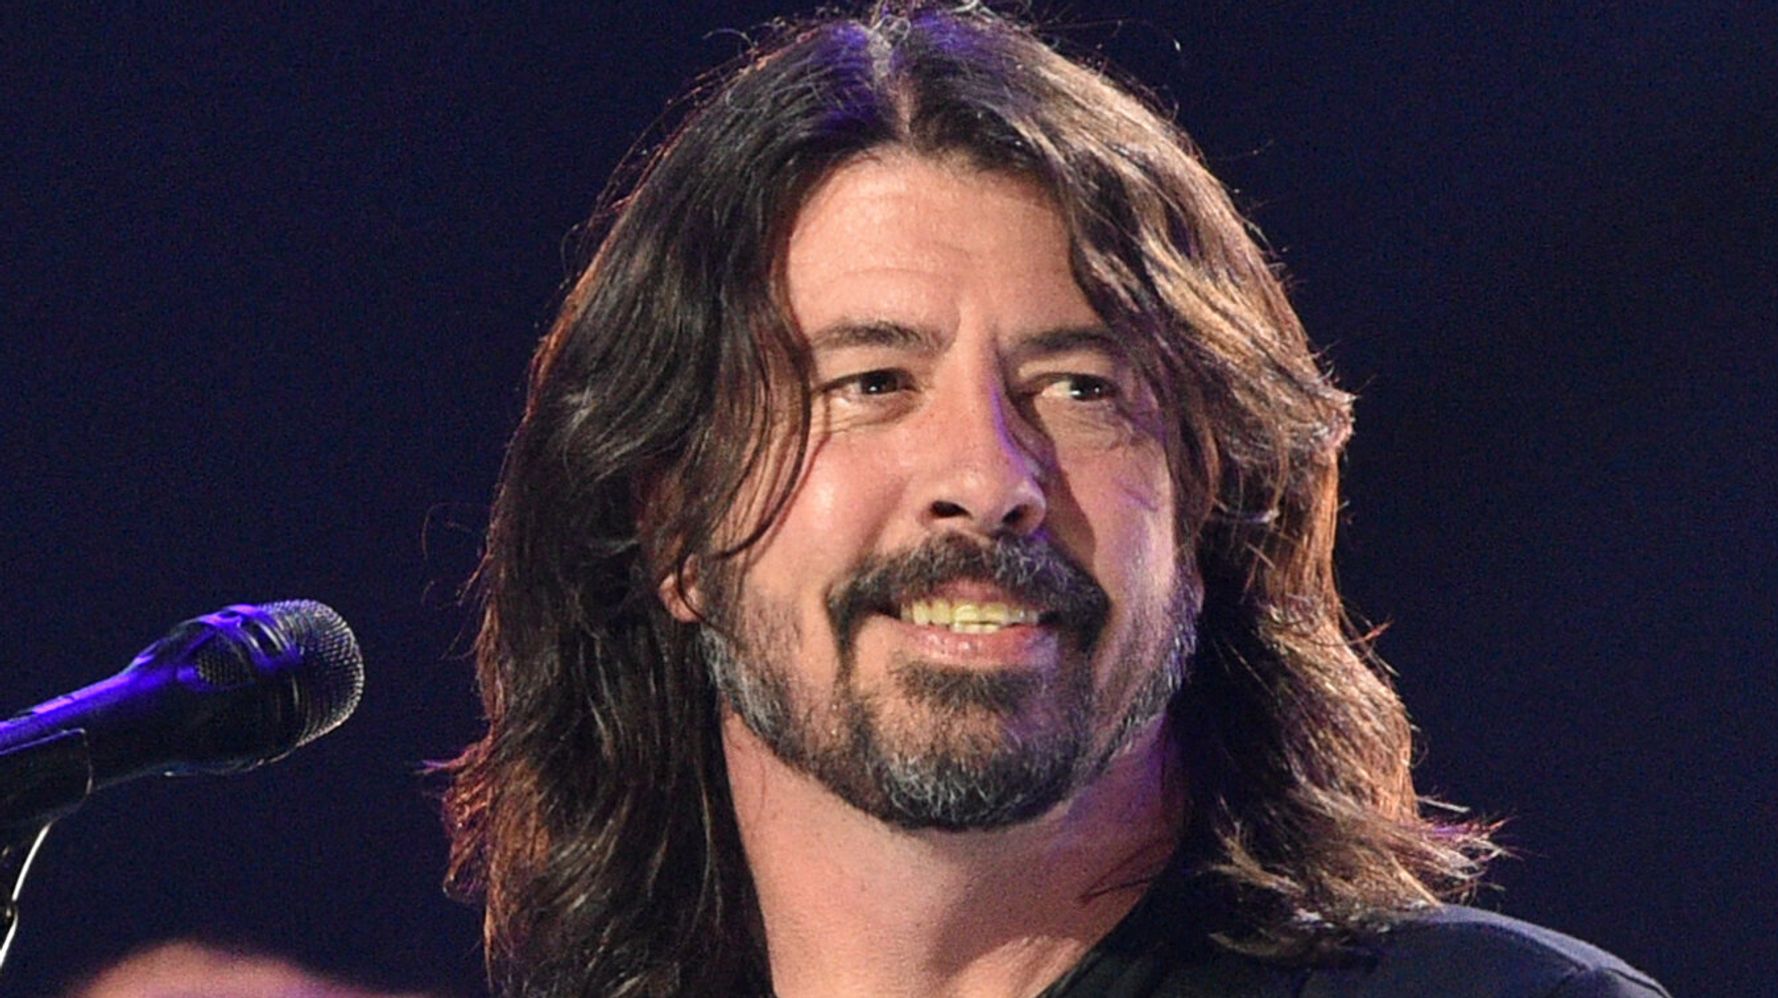 ‘Oh My God’: Dave Grohl Makes Surprise Discovery About An Iconic Nirvana Song